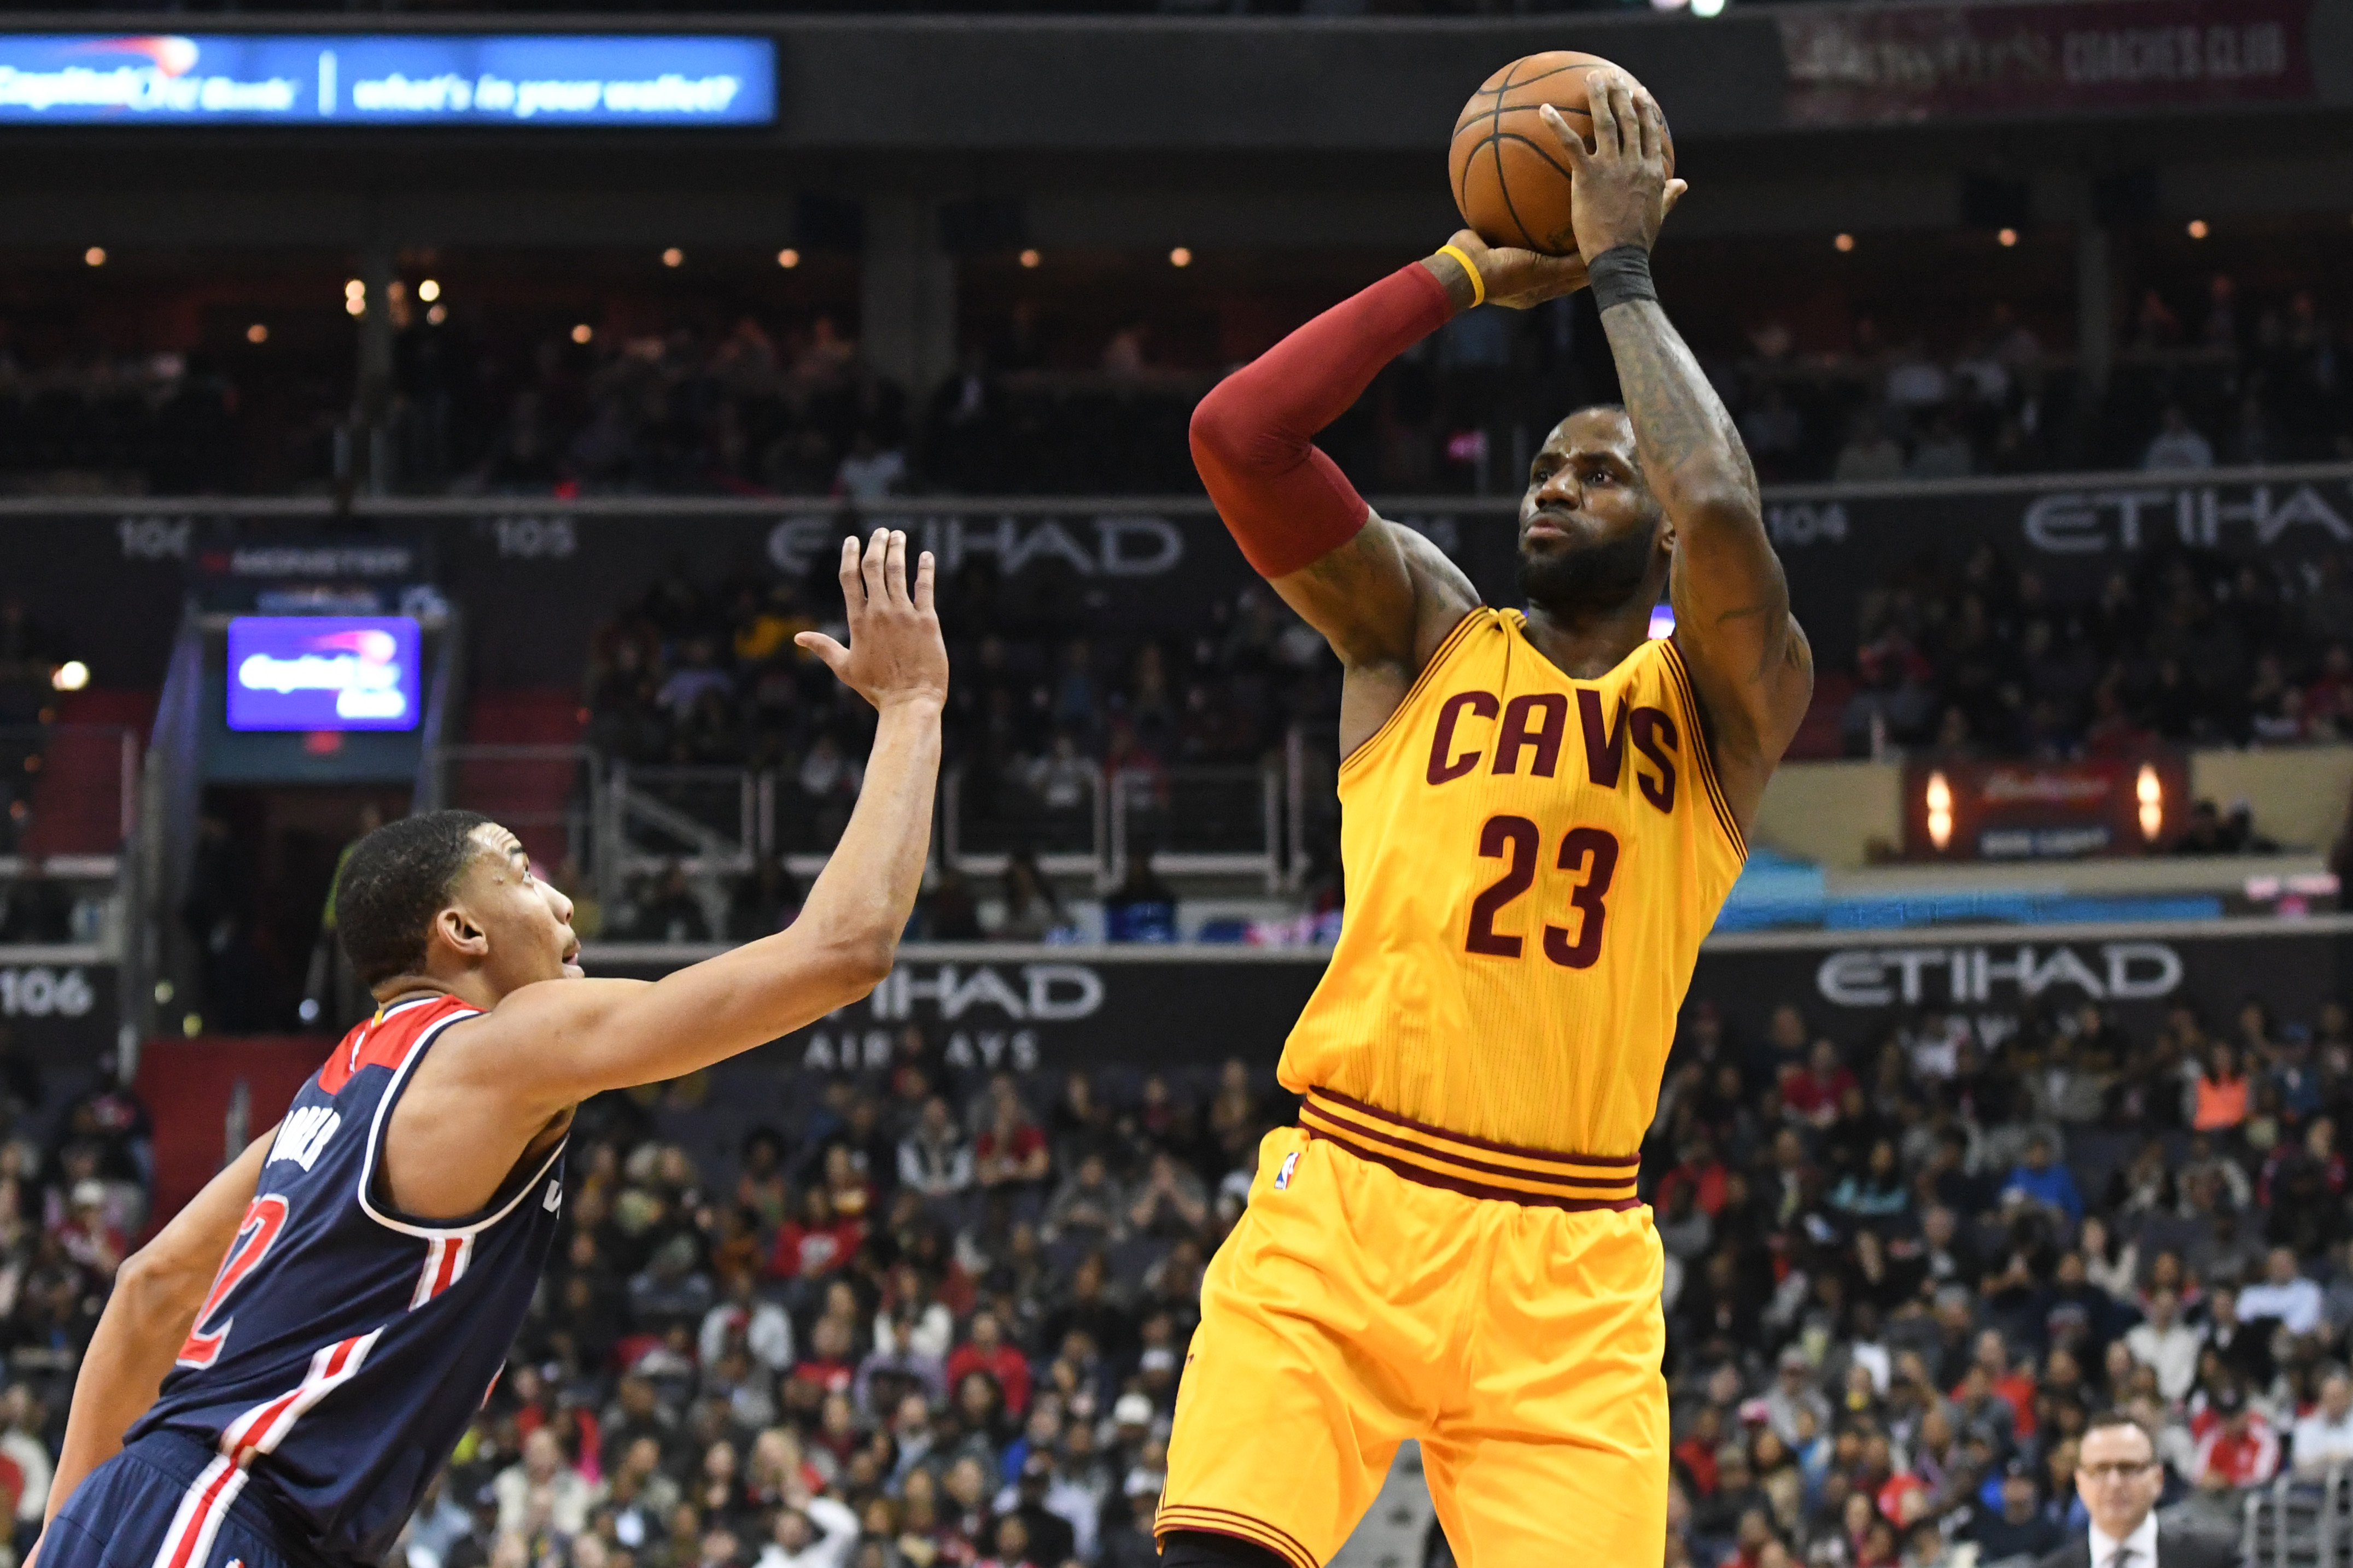 Twitter reacts to LeBron James' banked in 3 vs. Wizards